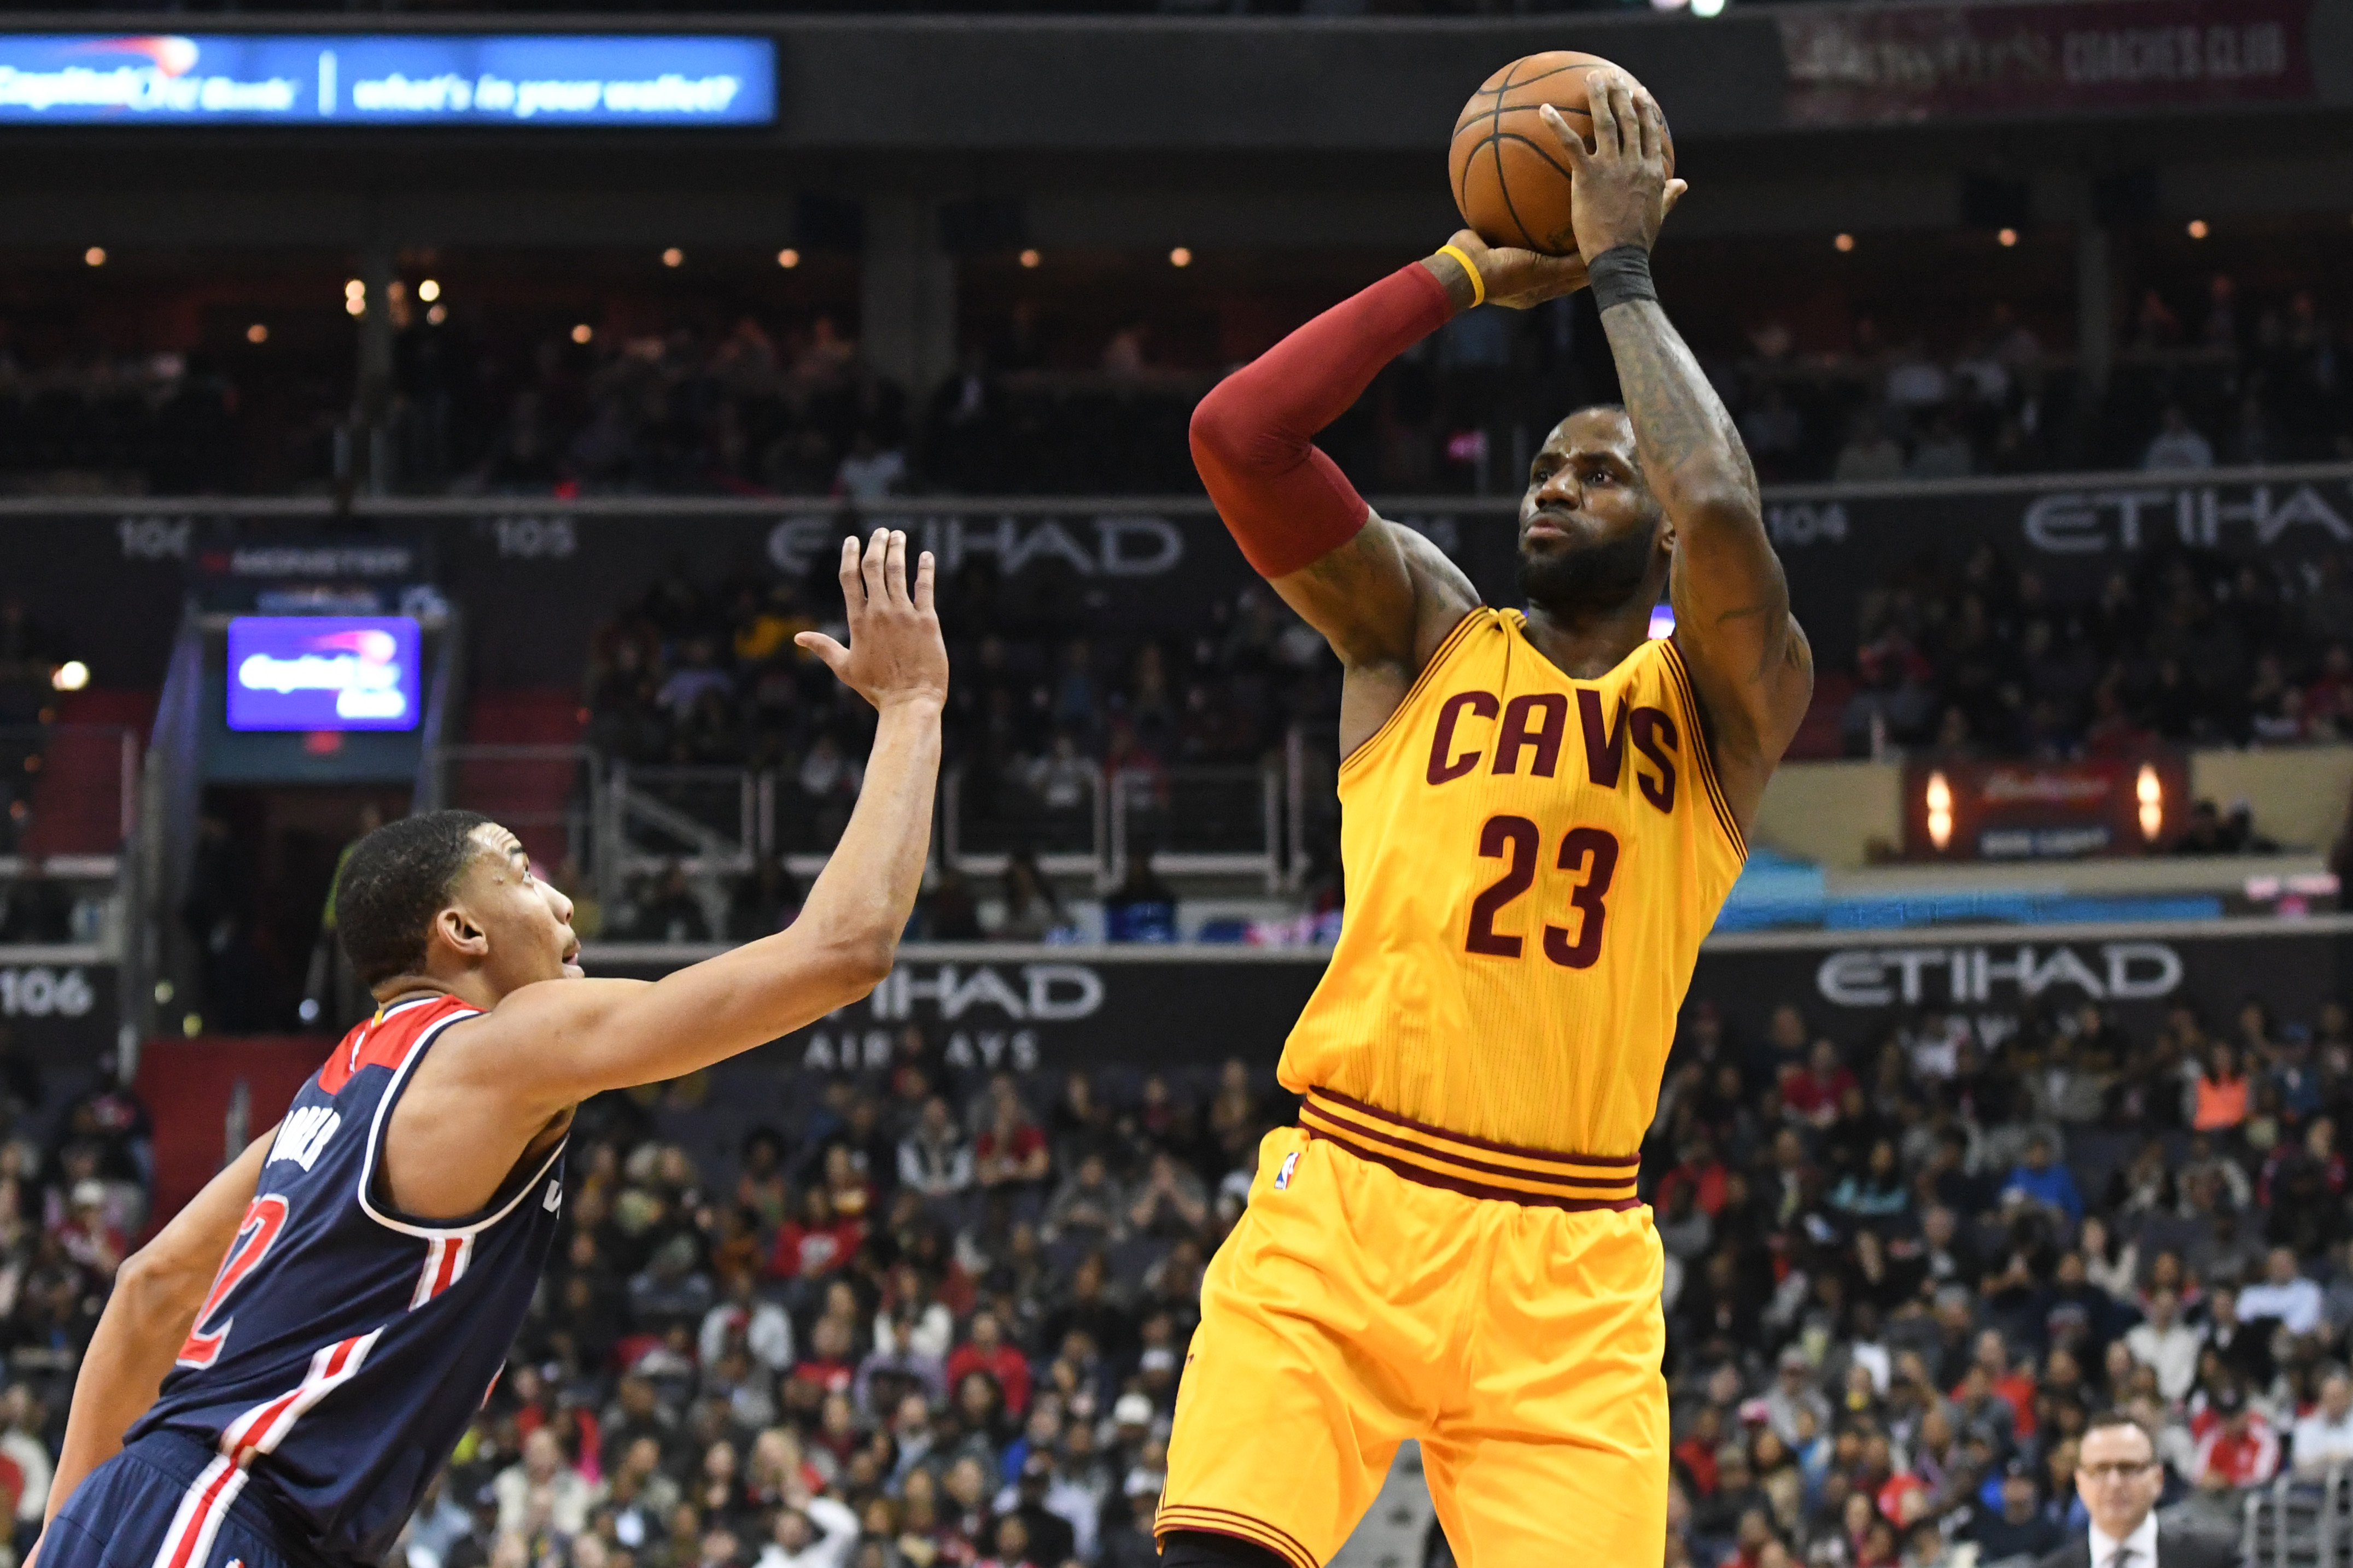 Twitter reacts to LeBron James' banked in 3 vs. Wizards